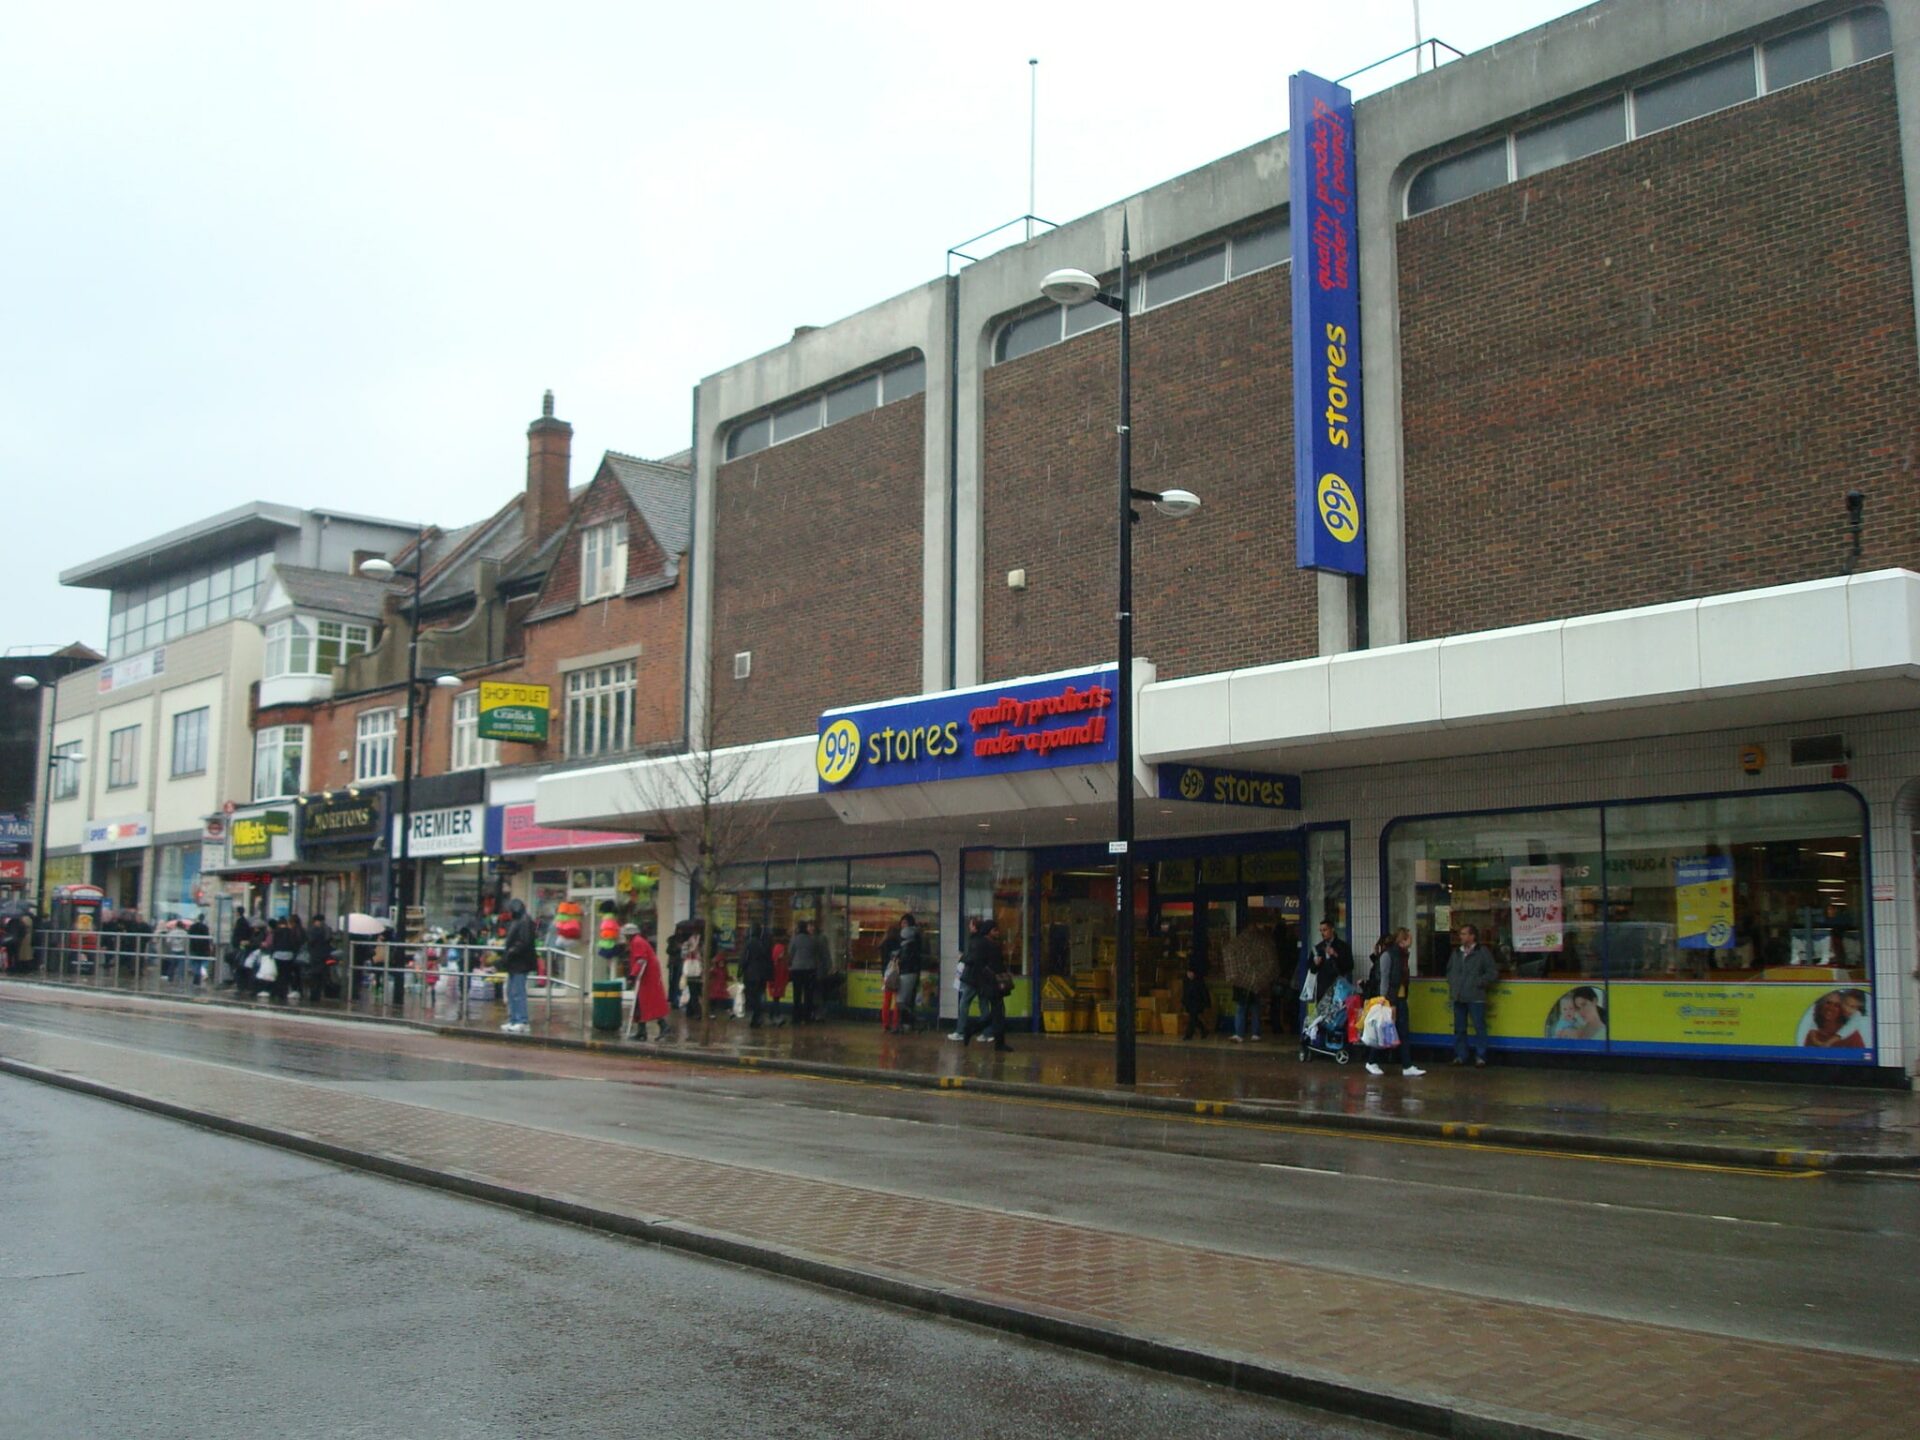 99p_Store,_Bromley_-_geograph.org.uk_-_1716117